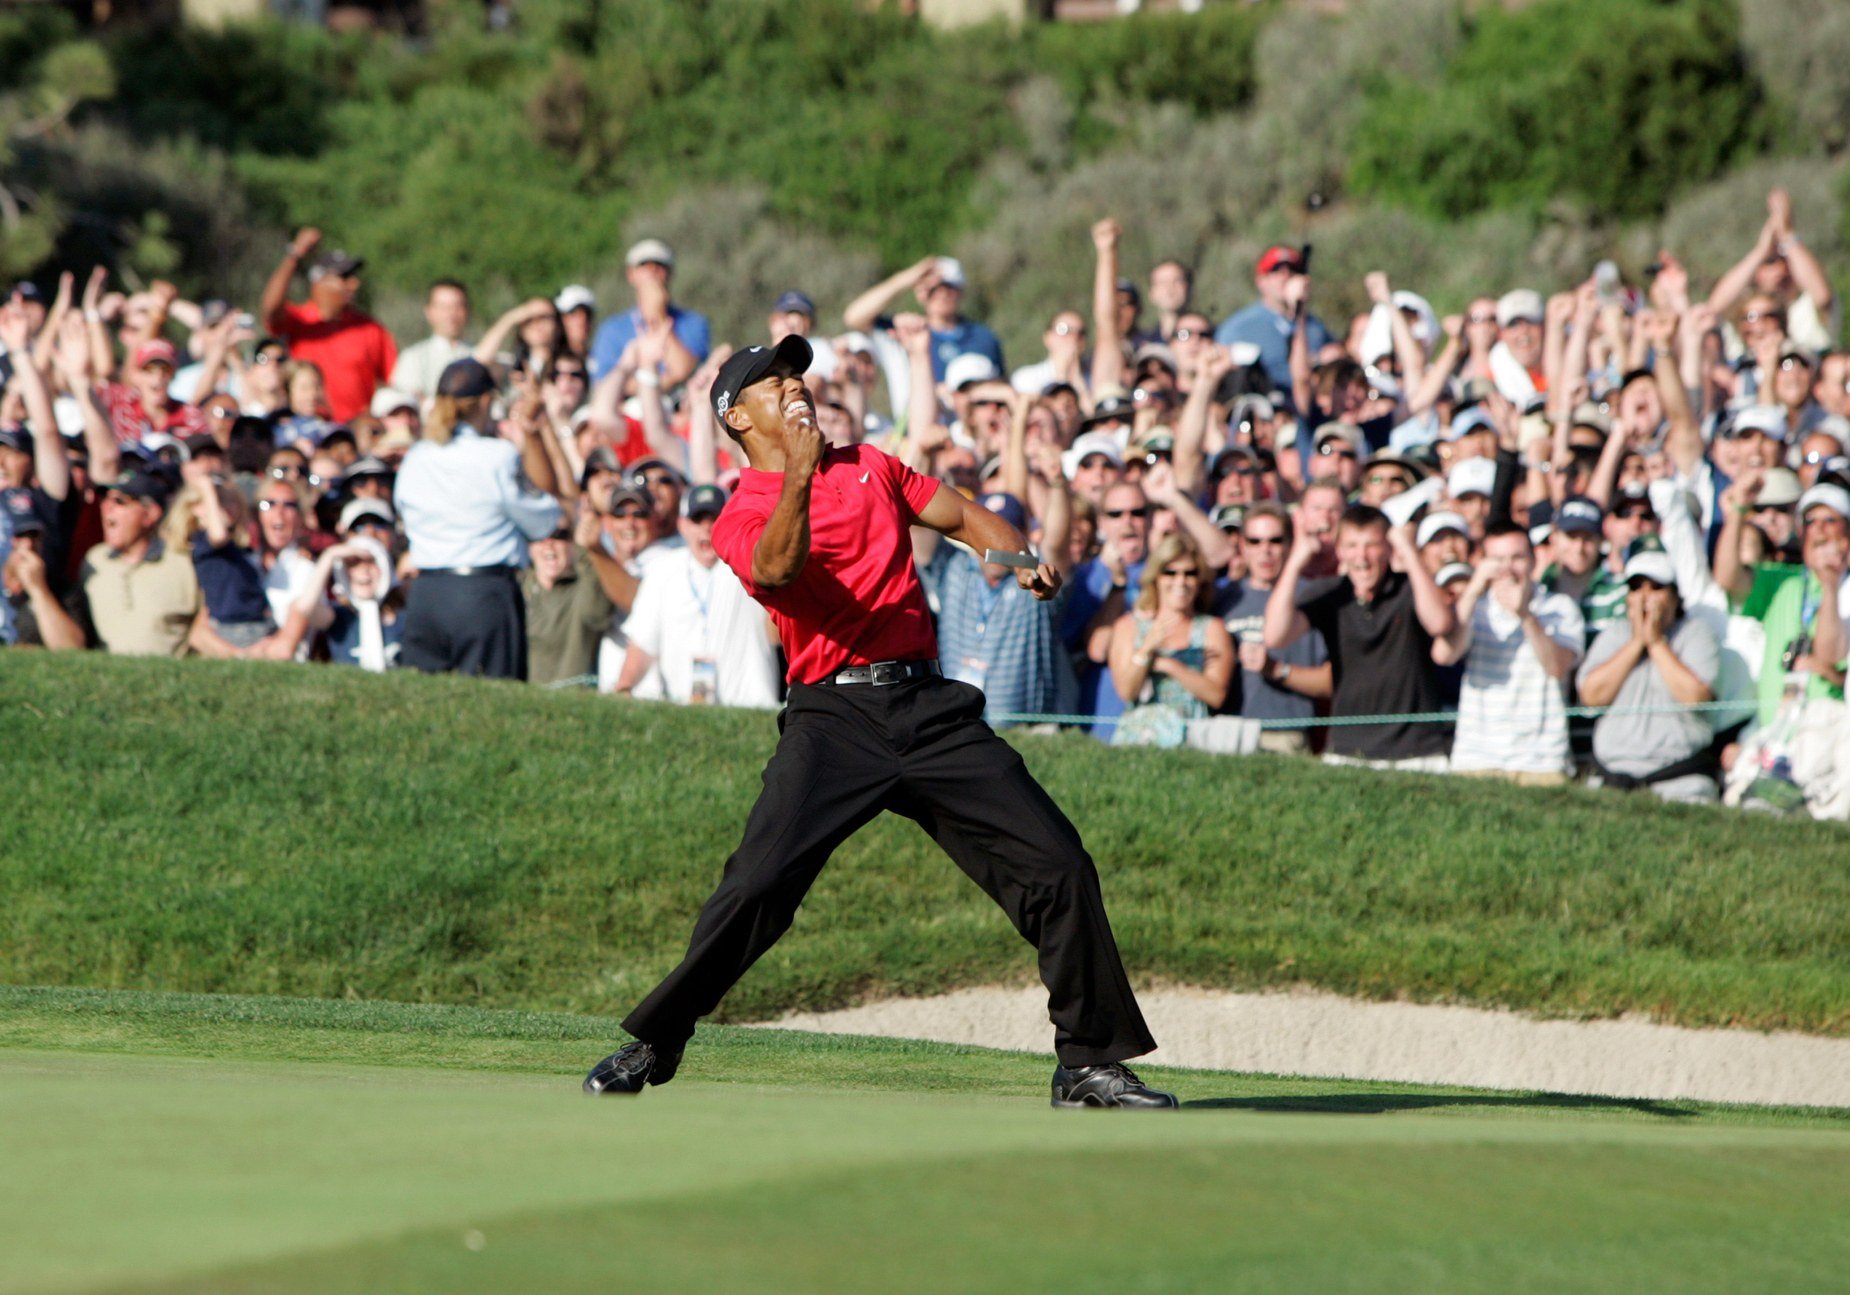 121st U.S. Open -- Will Torrey Pines Be As Tough As 2008?